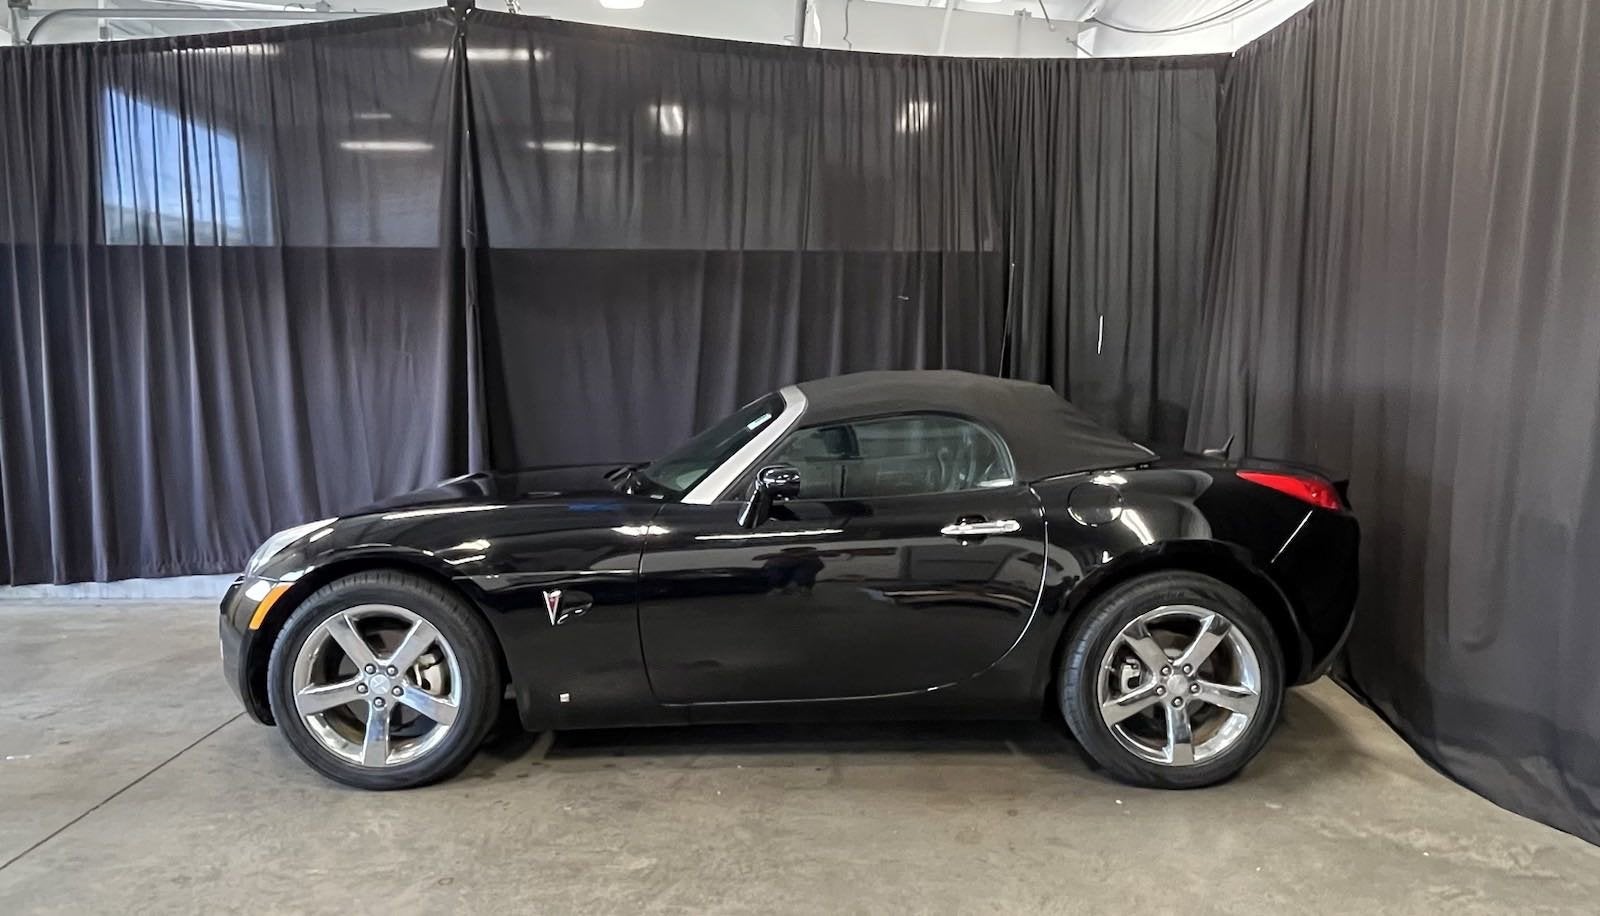 Used 2009 Pontiac Solstice GXP with VIN 1G2MT35X39Y103738 for sale in Fort Smith, AR